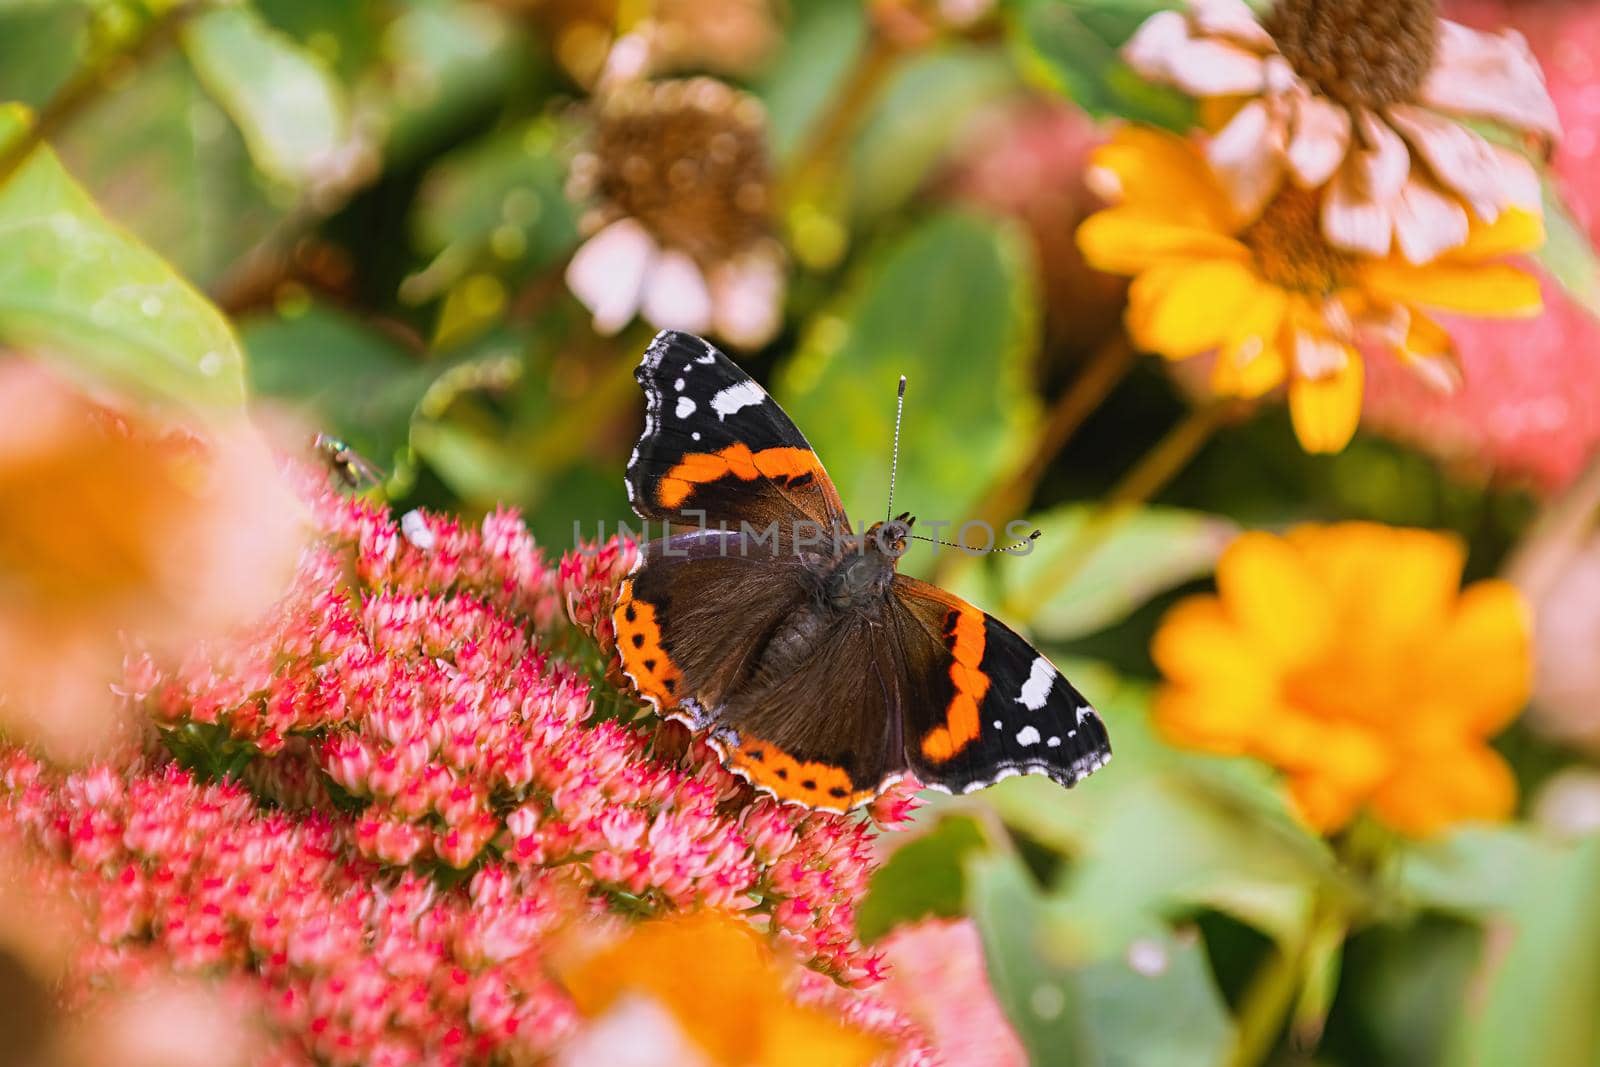 Butterfly Red admiral on the flowers by SNR